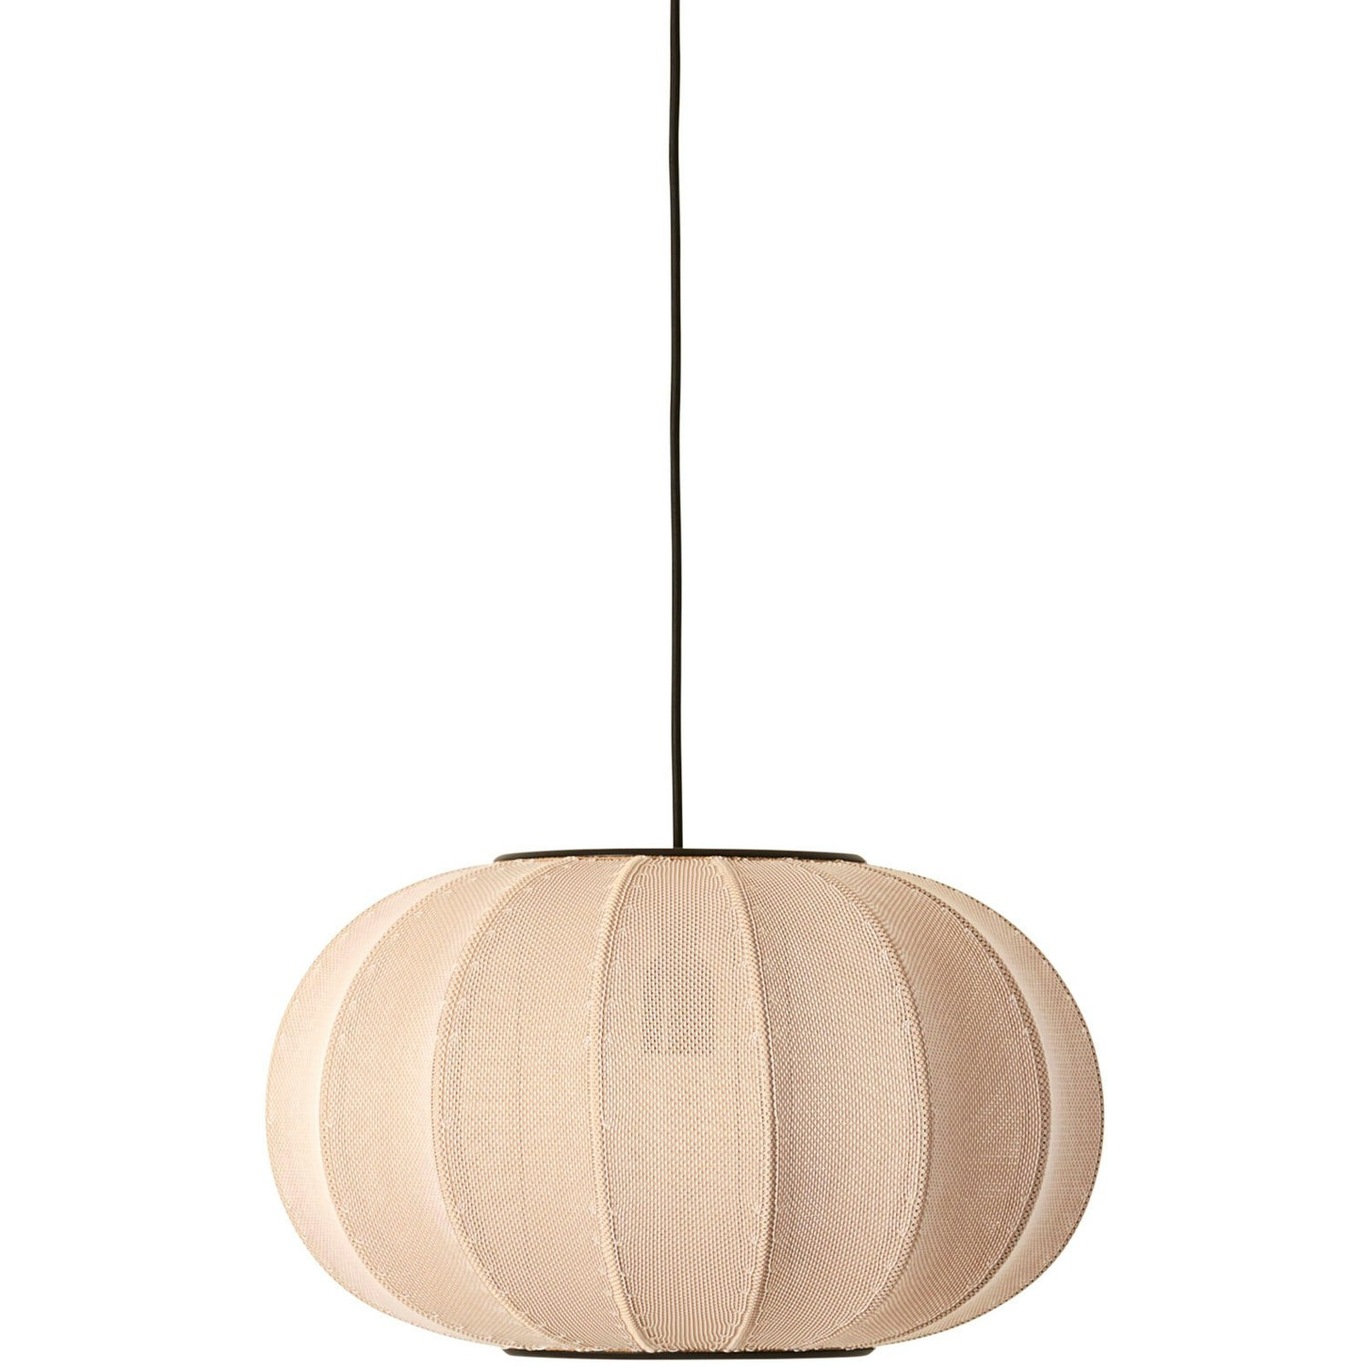 Knit-Wit Hanglamp Ovaal 45 cm, Sand Stone